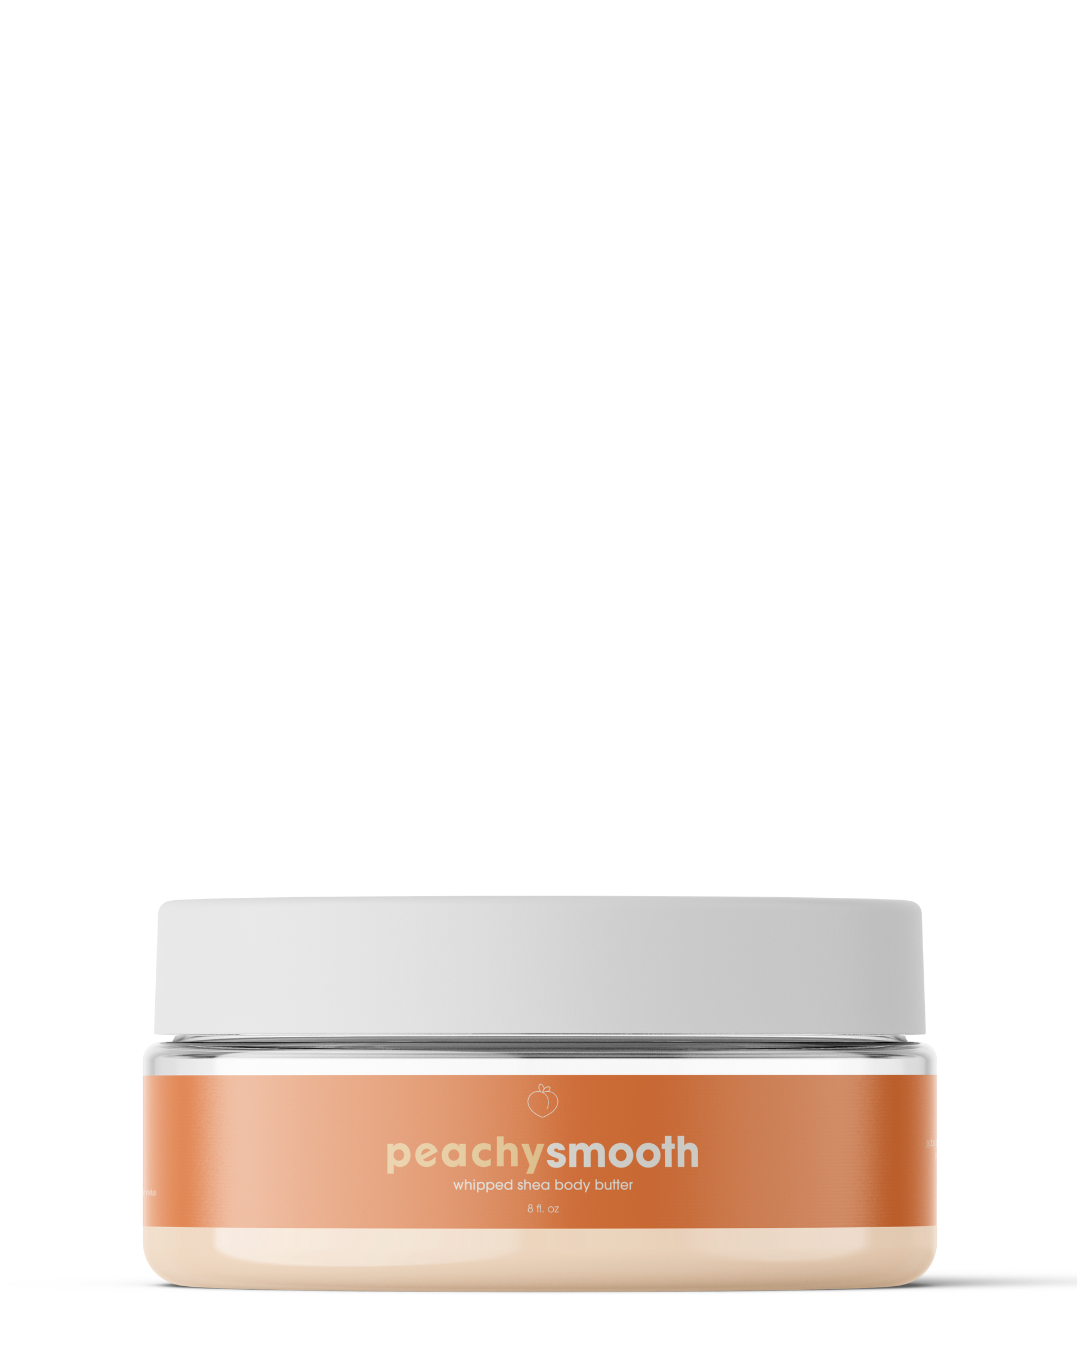 Peachy Smooth - Whipped Shea Body Butter